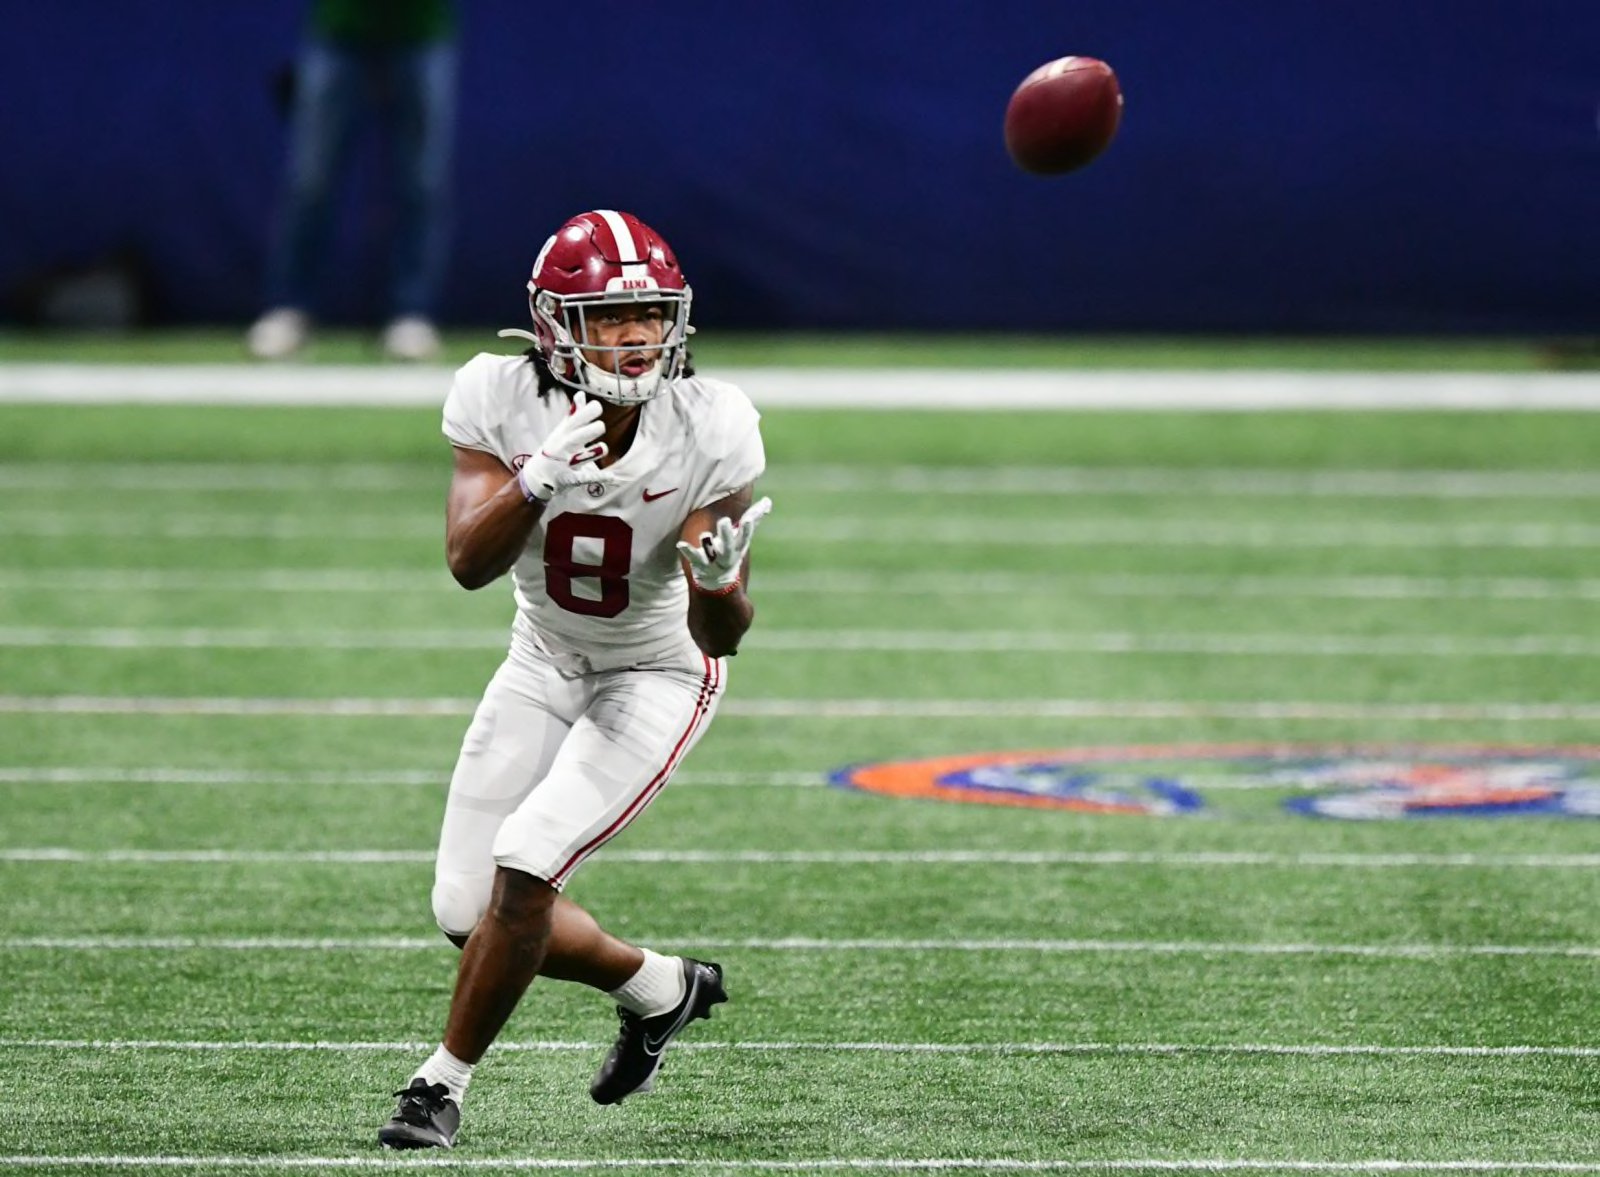 2022 NFL Draft: Alabama WR John Metchie III the next in line - Page 2